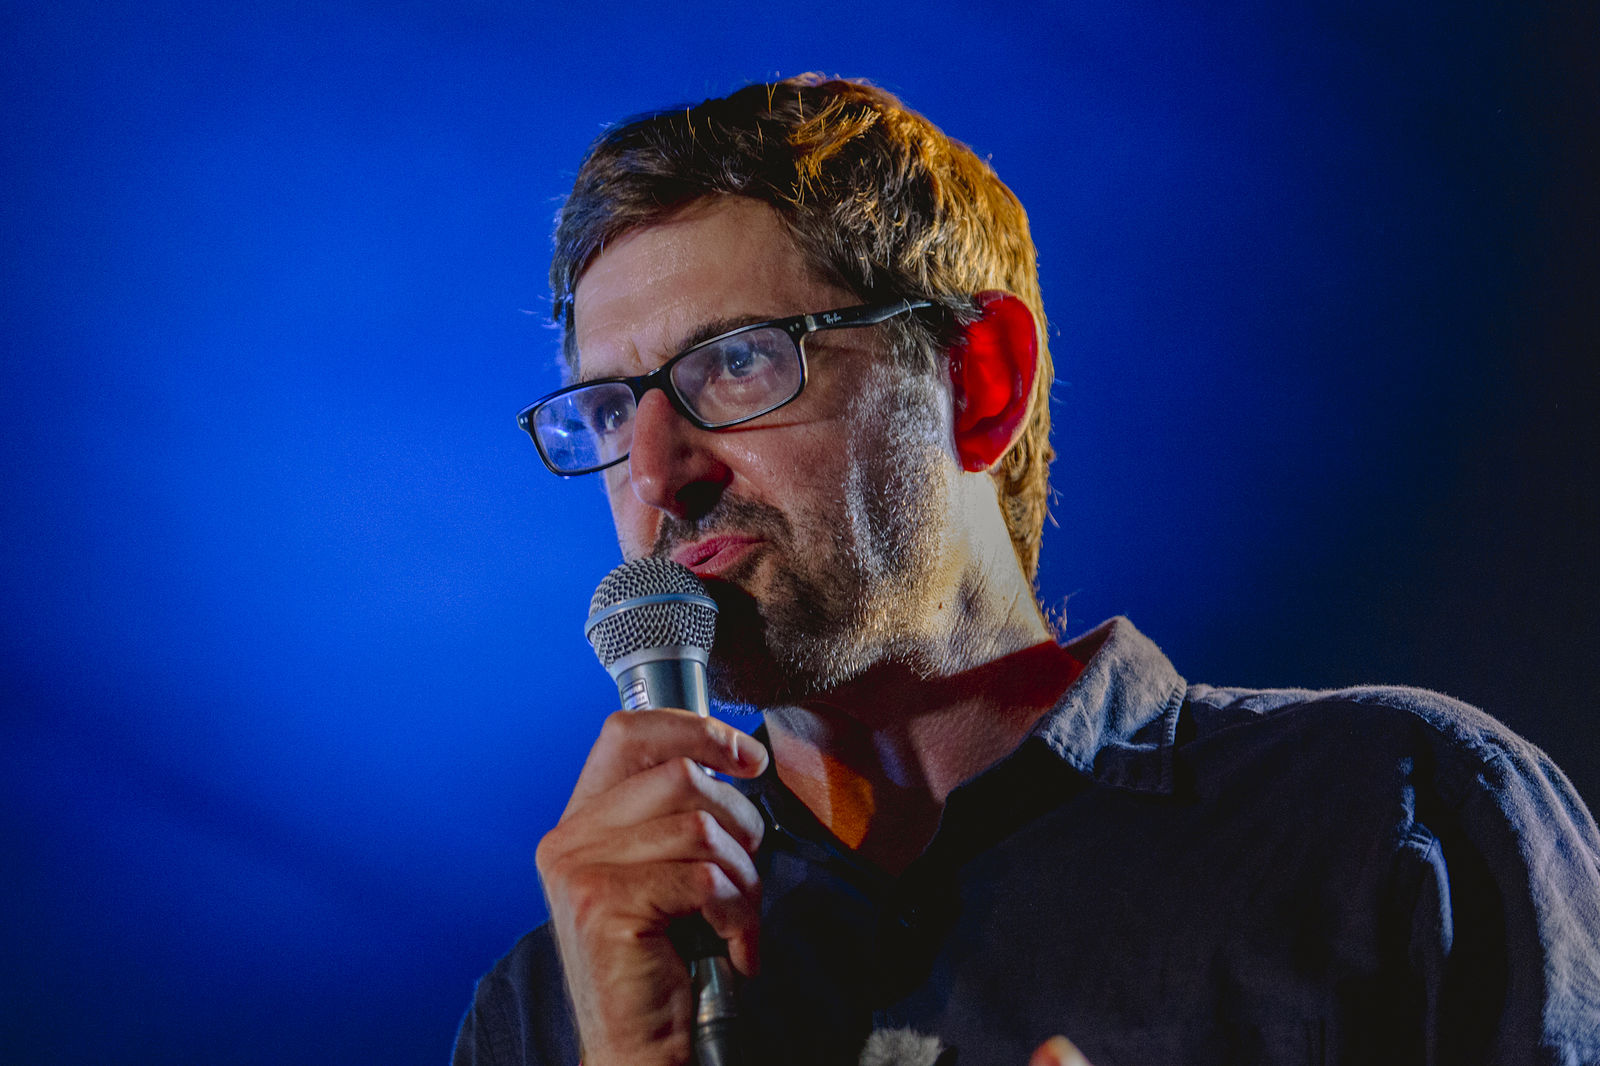 Adam Buxton in conversation with Louis Theroux